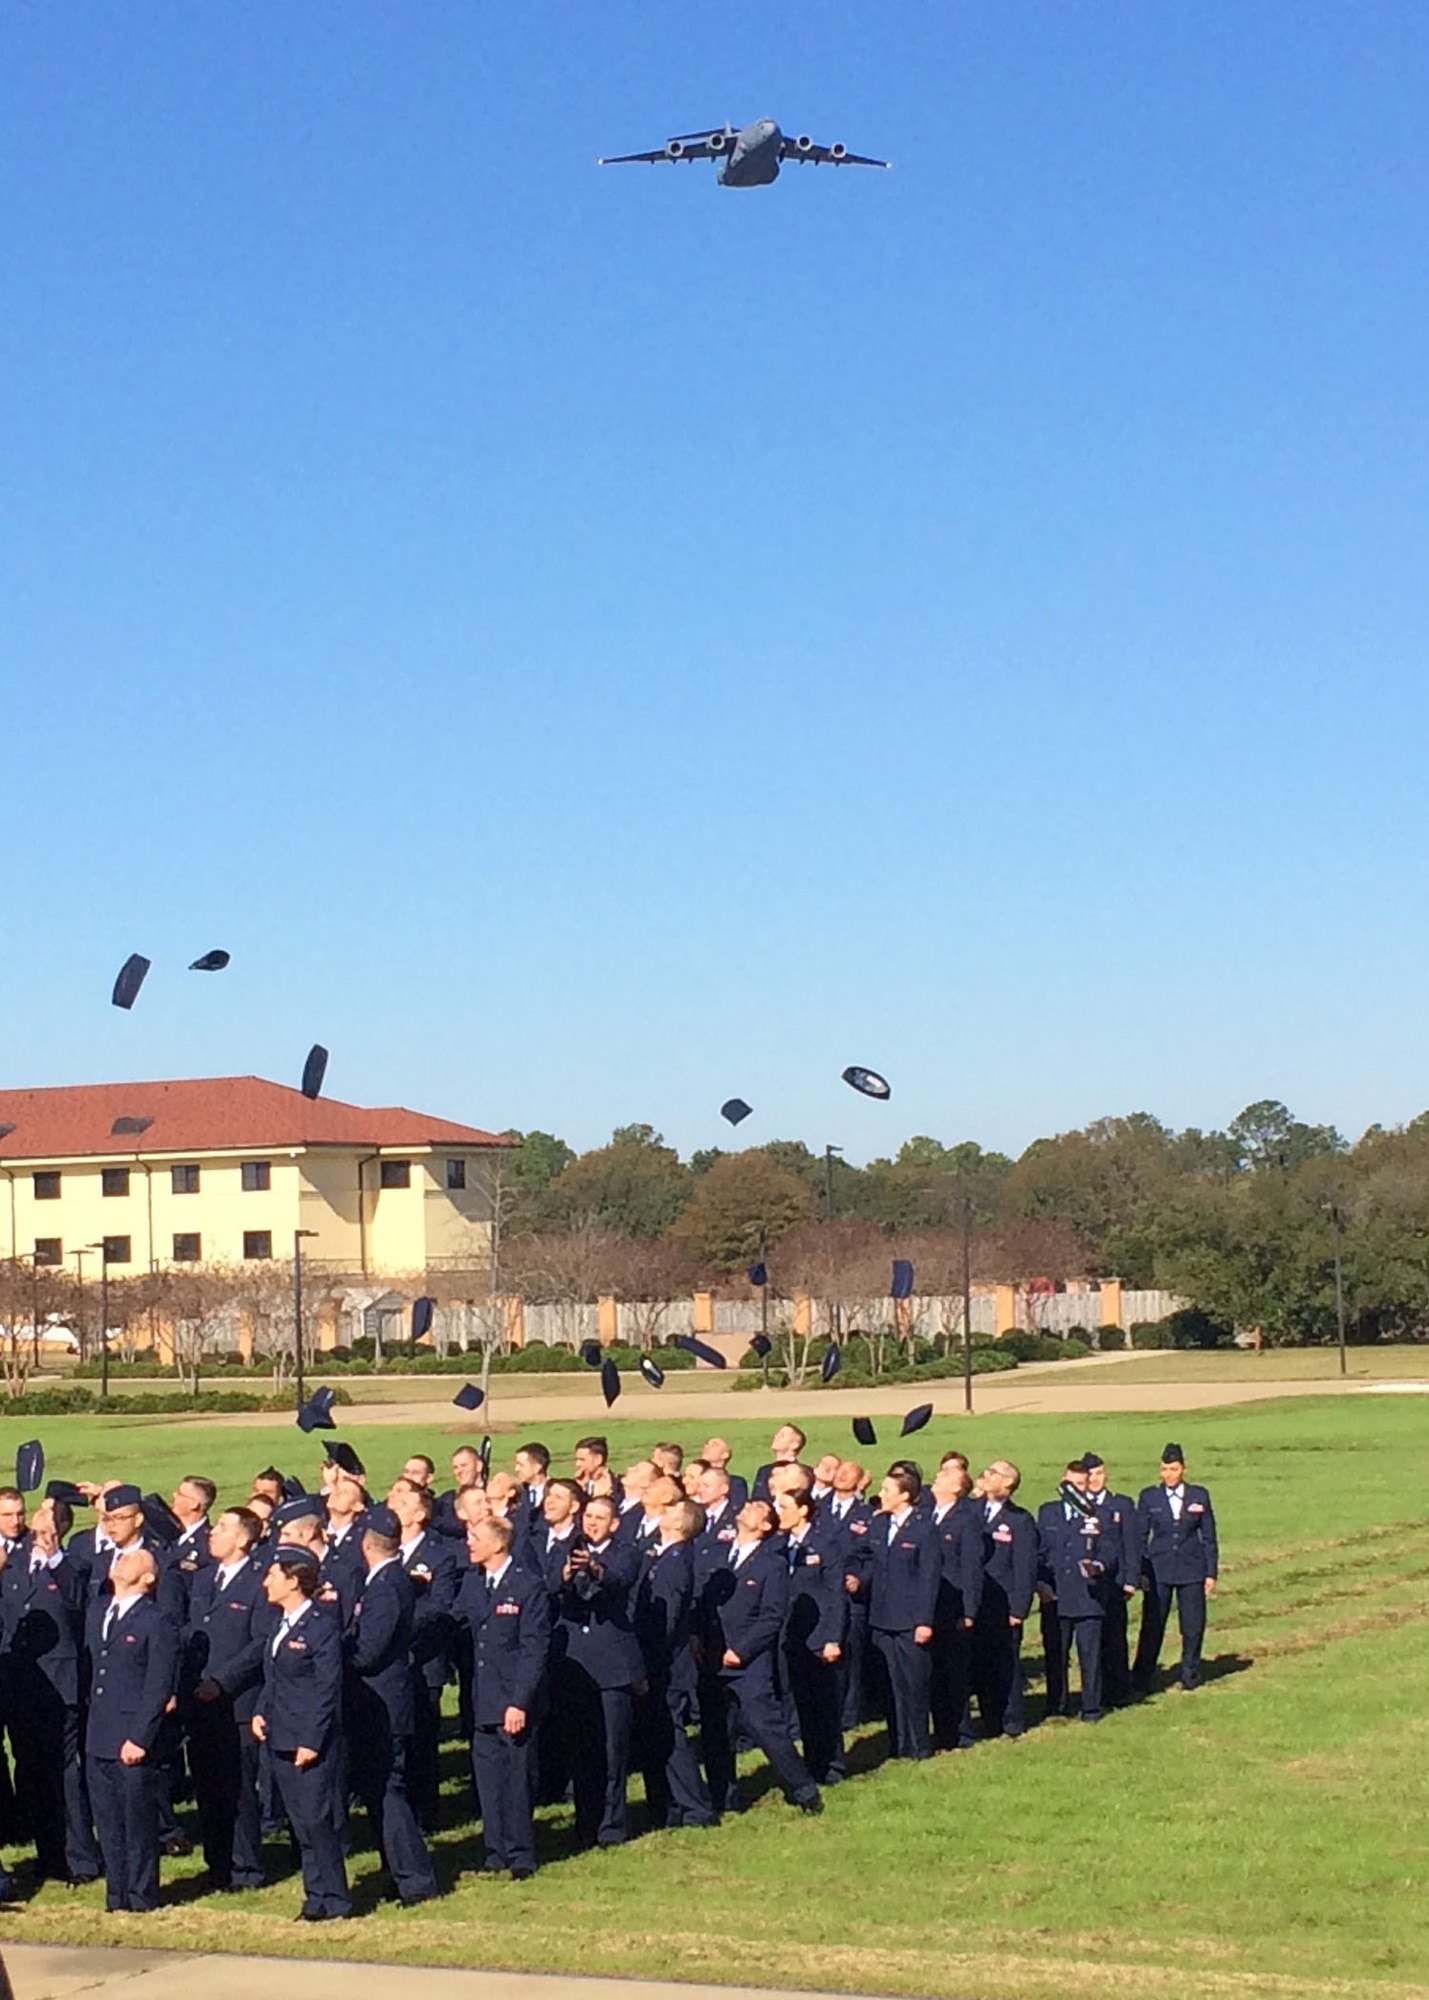 A C-17 Globemaster III flies overhead as newly commissioned 120th Airlift Wing 2nd Lieutenants Matthew Hall, Alissa Engel, Bradford Lewis, and Joshua Briggs join fellow classmates in throwing their hats into the air in celebration of their graduation from Officer Training School at Maxwell Air Force Base, Ala. Dec. 18, 2015. (U.S. Air National Guard photo by Capt. Kenneth Fechter/Released)